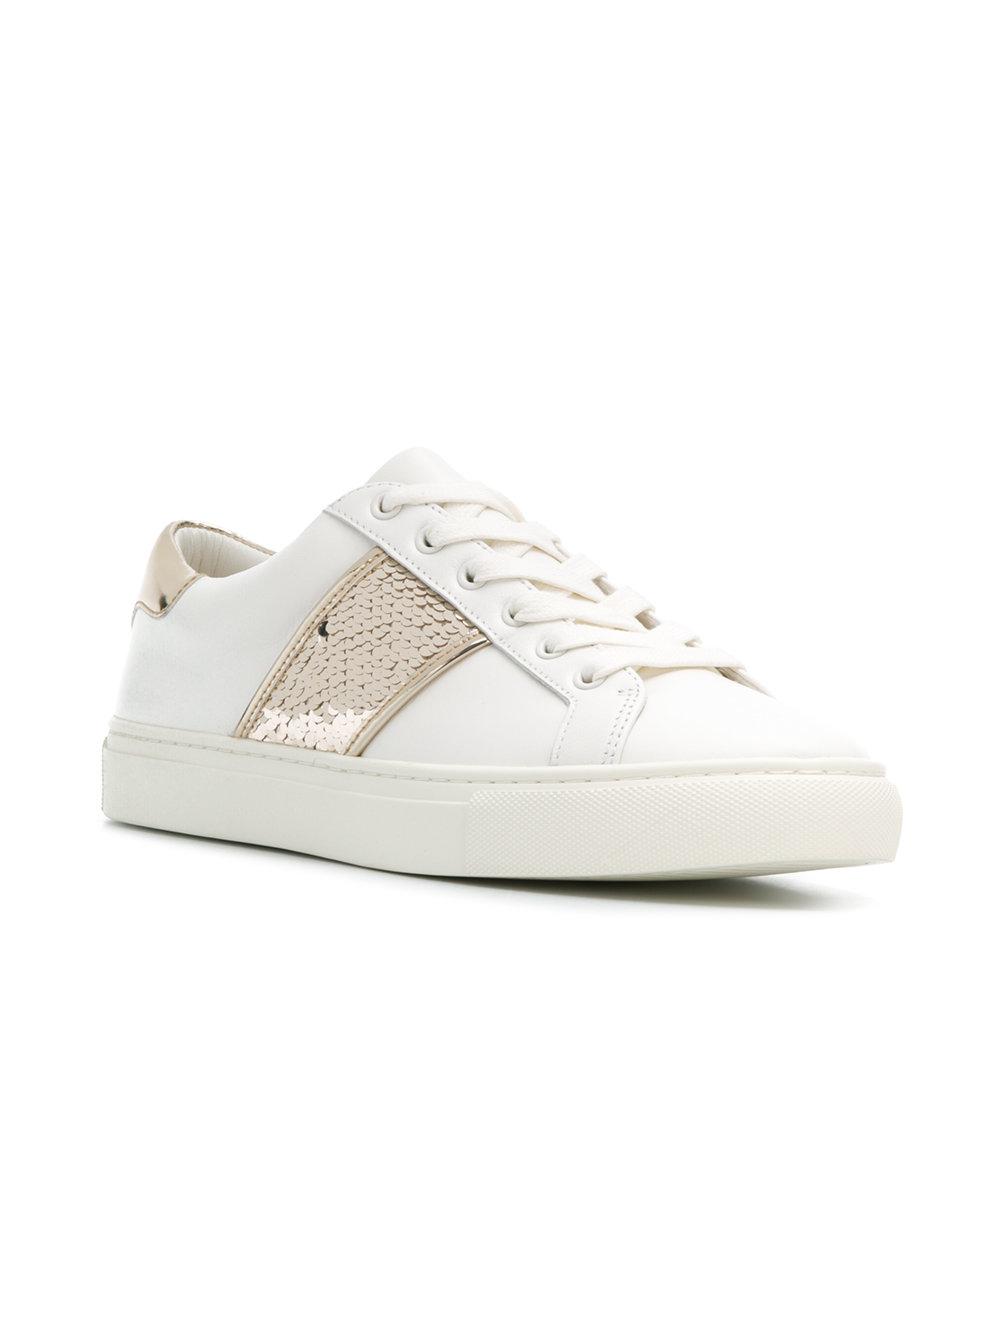 Tory Burch Carter Sequin Sneakers in White - Lyst